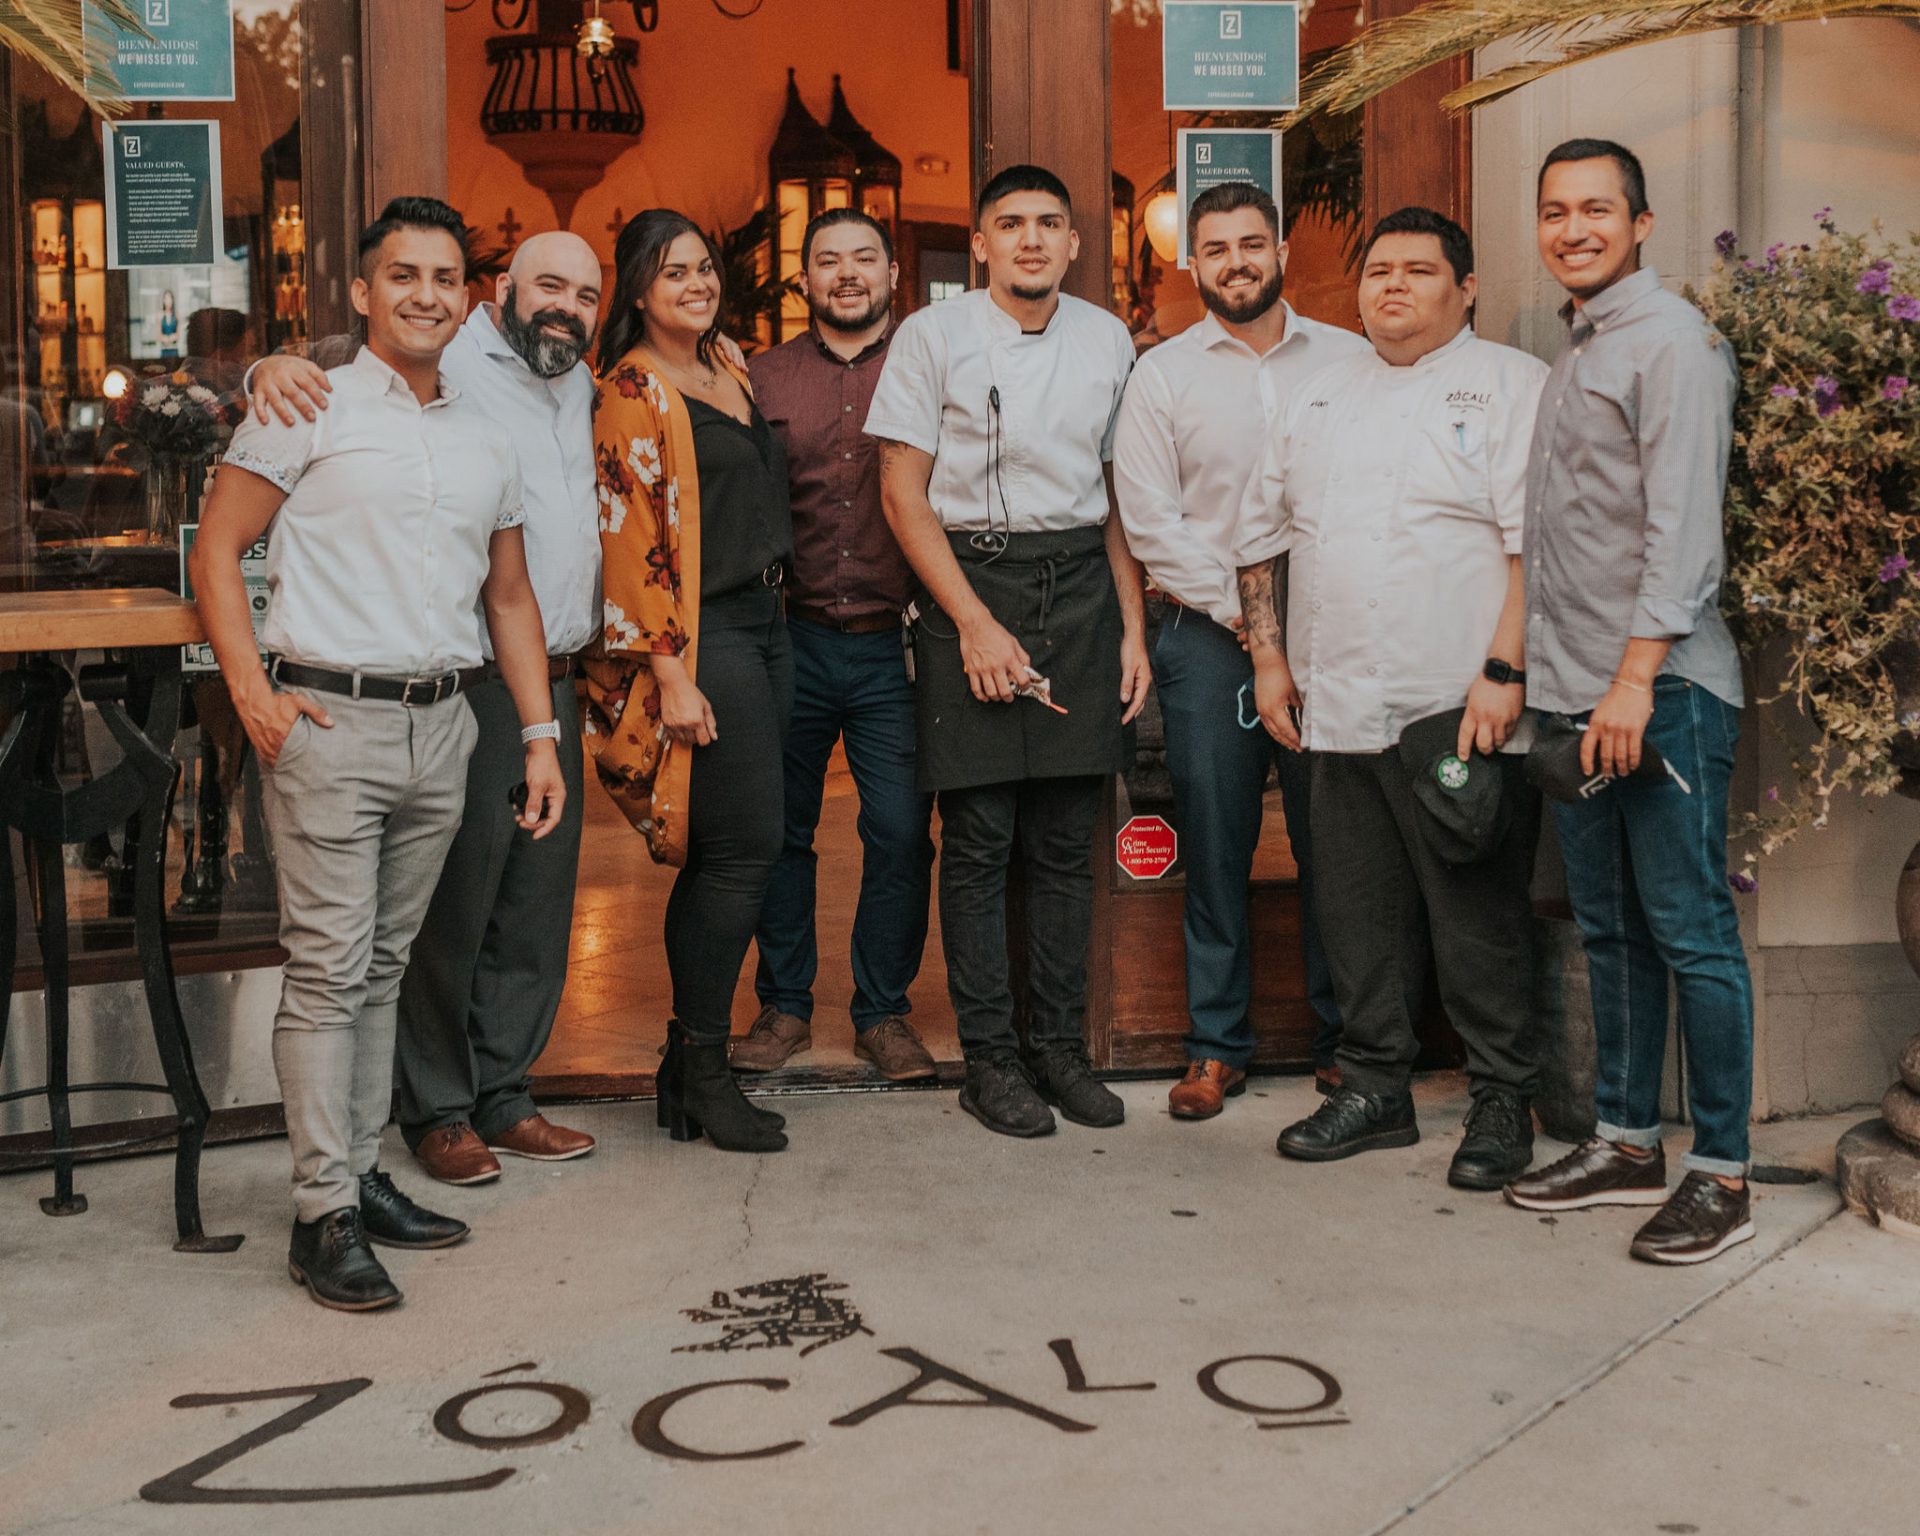 Zócalo staff posing for a picture